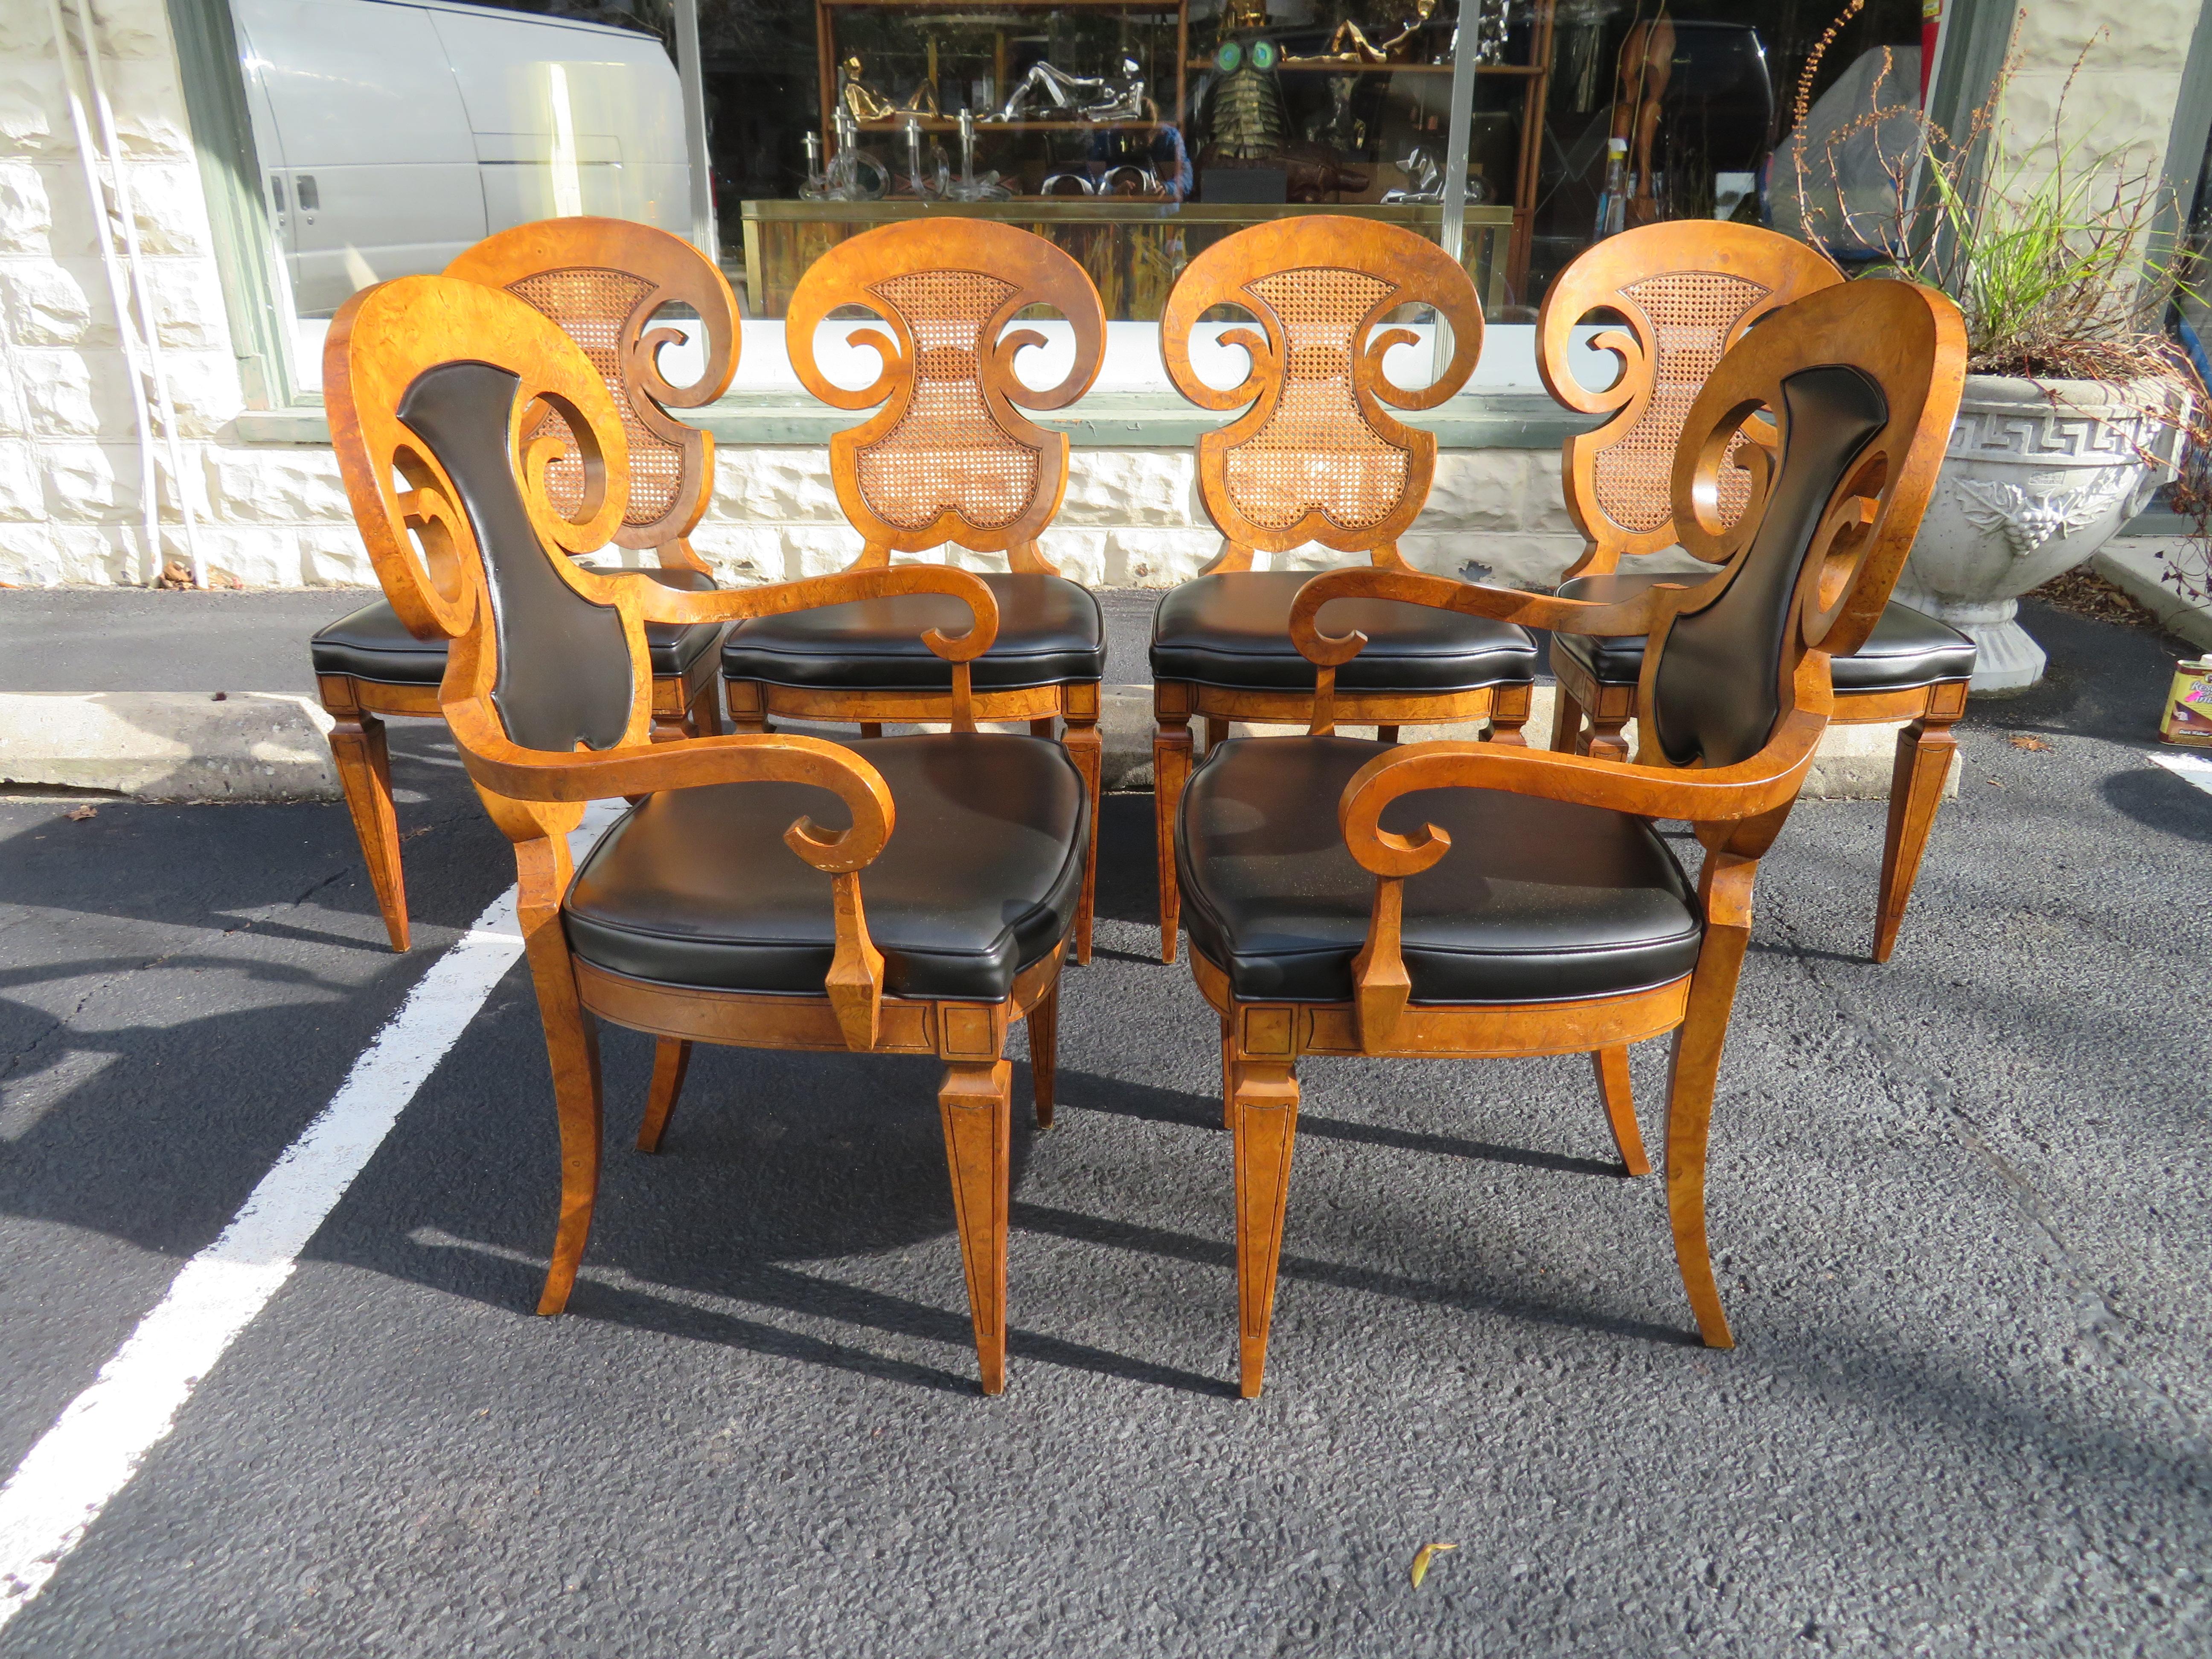 Stunning set of 6 William Doezema Biebermeier Amboyna dining chairs for Mastercraft. This set retains it's original black leather in nice vintage condition but the foam looks to be crumbling. All side chairs have their original caned backs in very